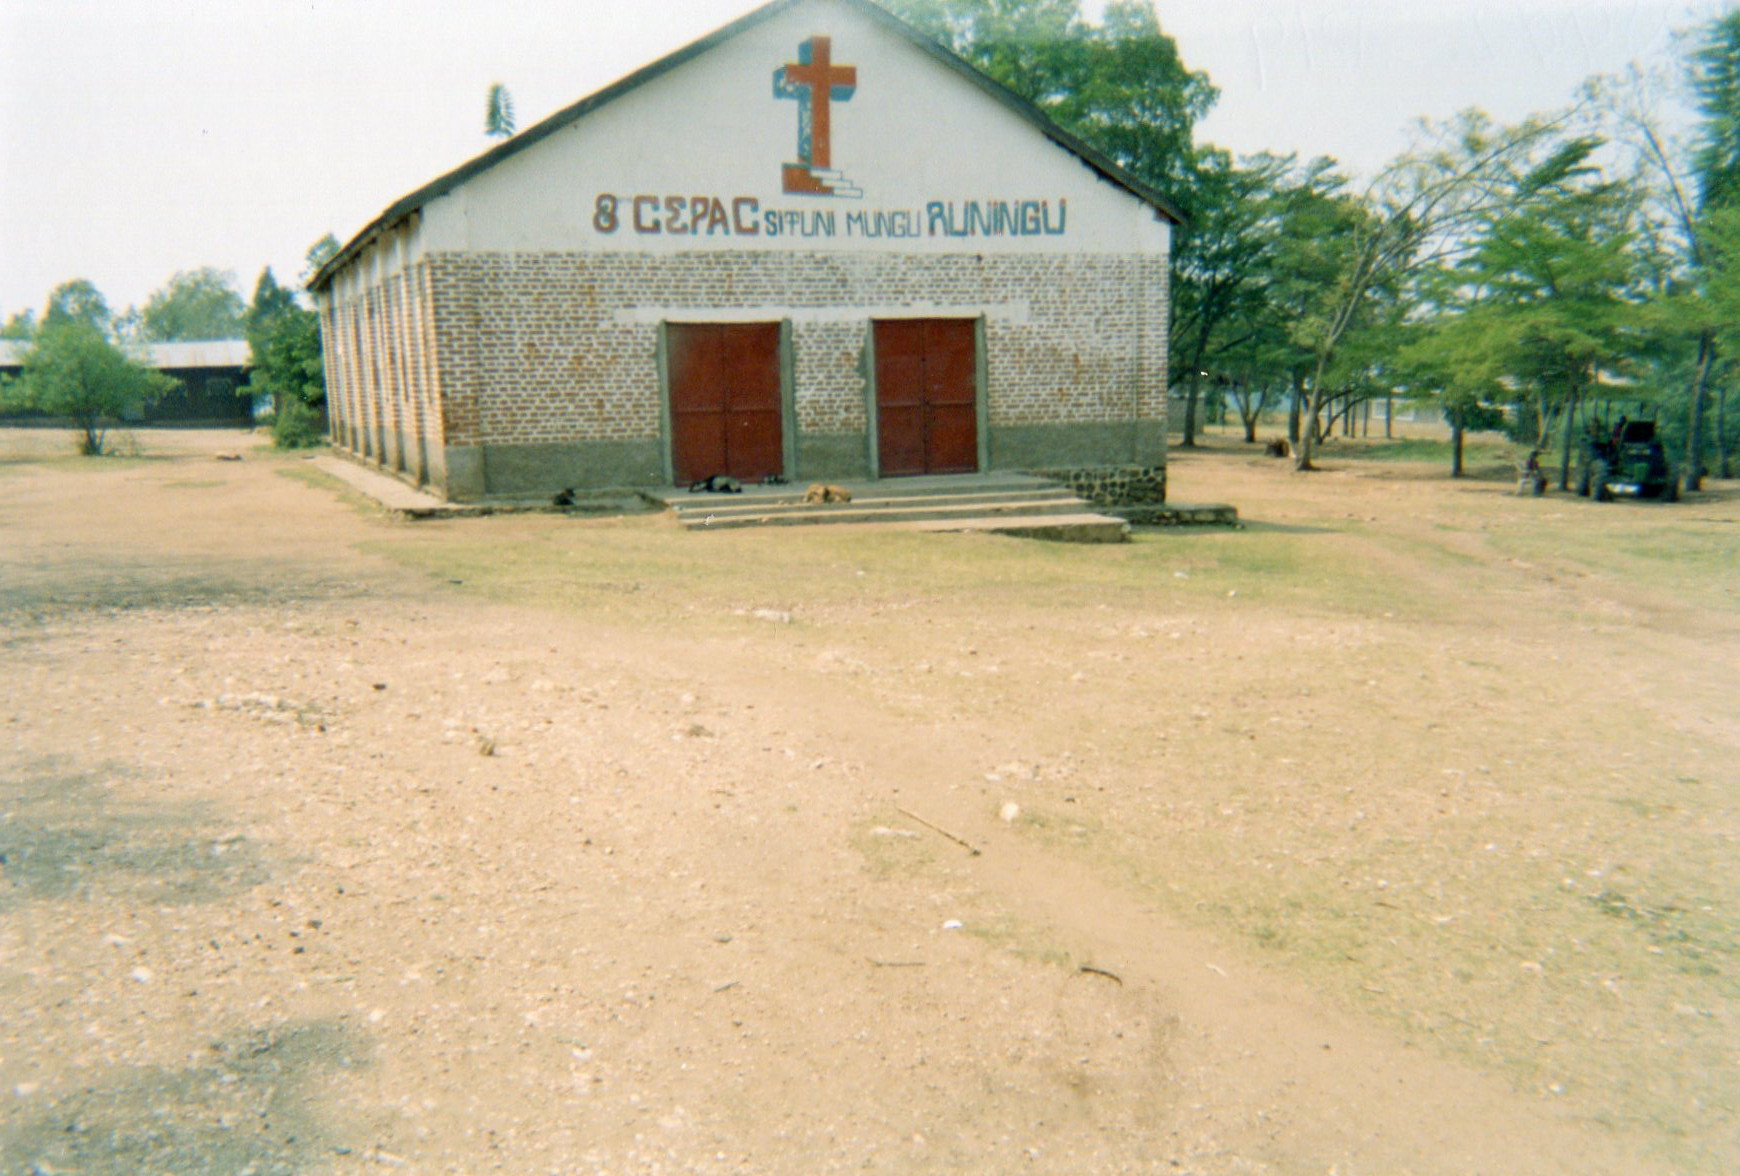  This photo shows the church where I was baptised and where I discovered God as my Saviour after leaving the armed groups.&nbsp; 